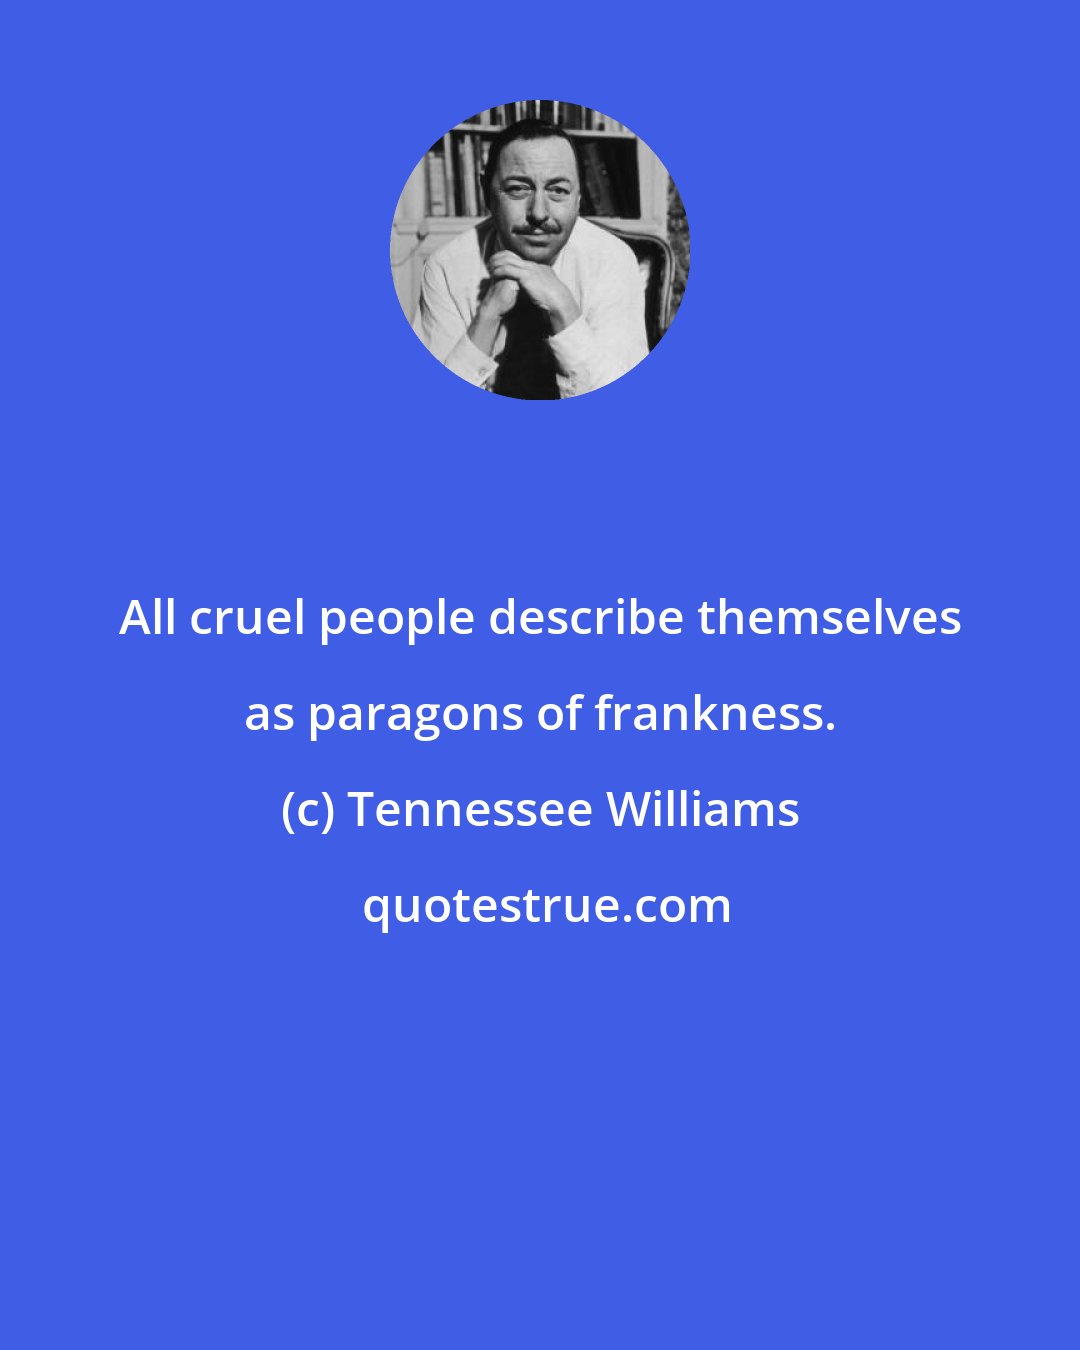 Tennessee Williams: All cruel people describe themselves as paragons of frankness.